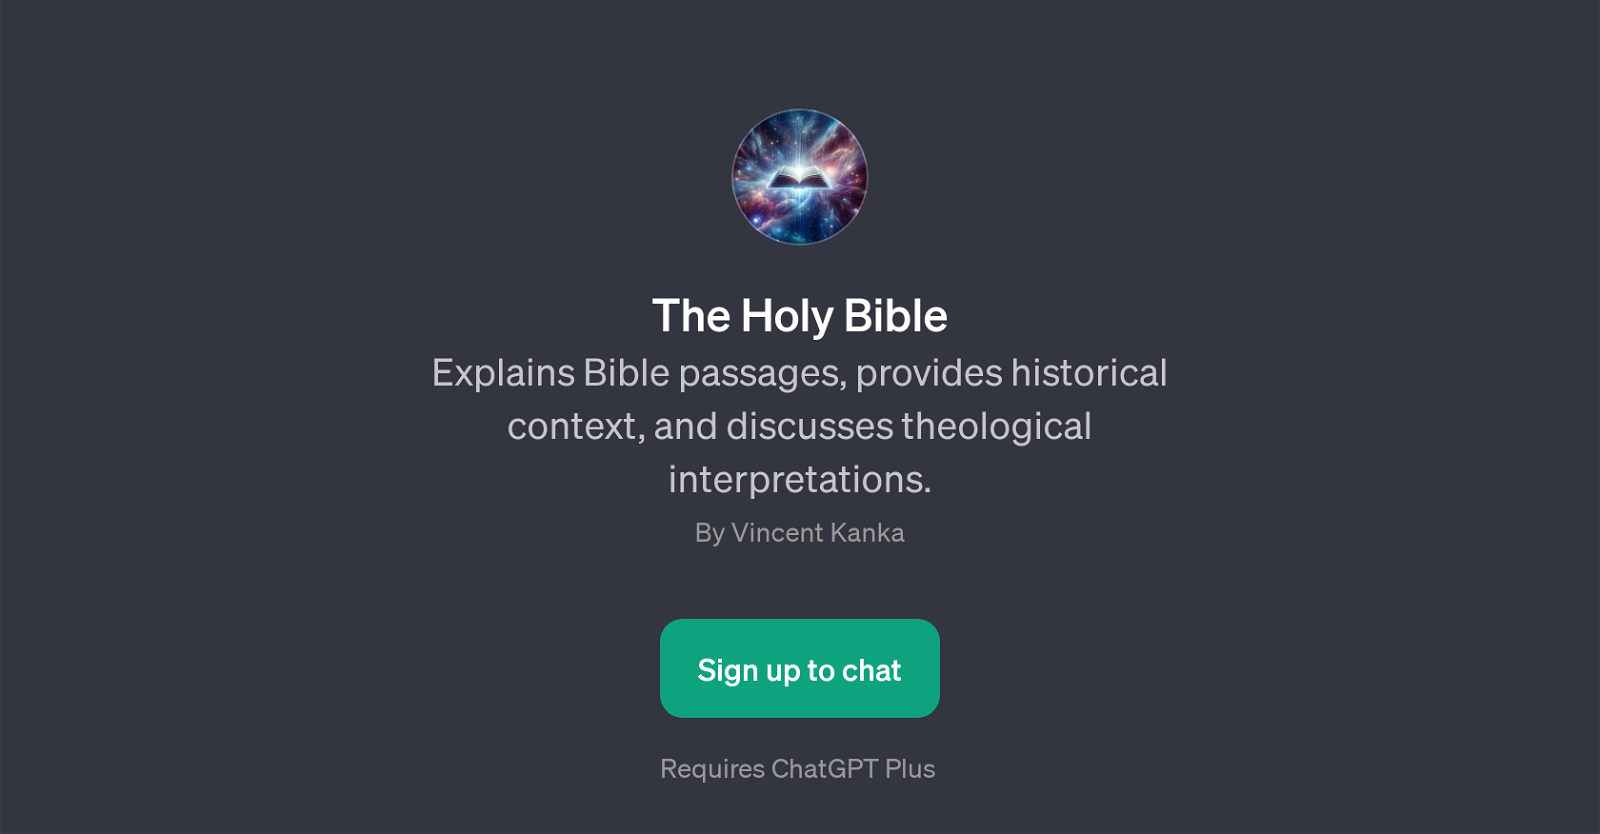 The Holy Bible GPT website